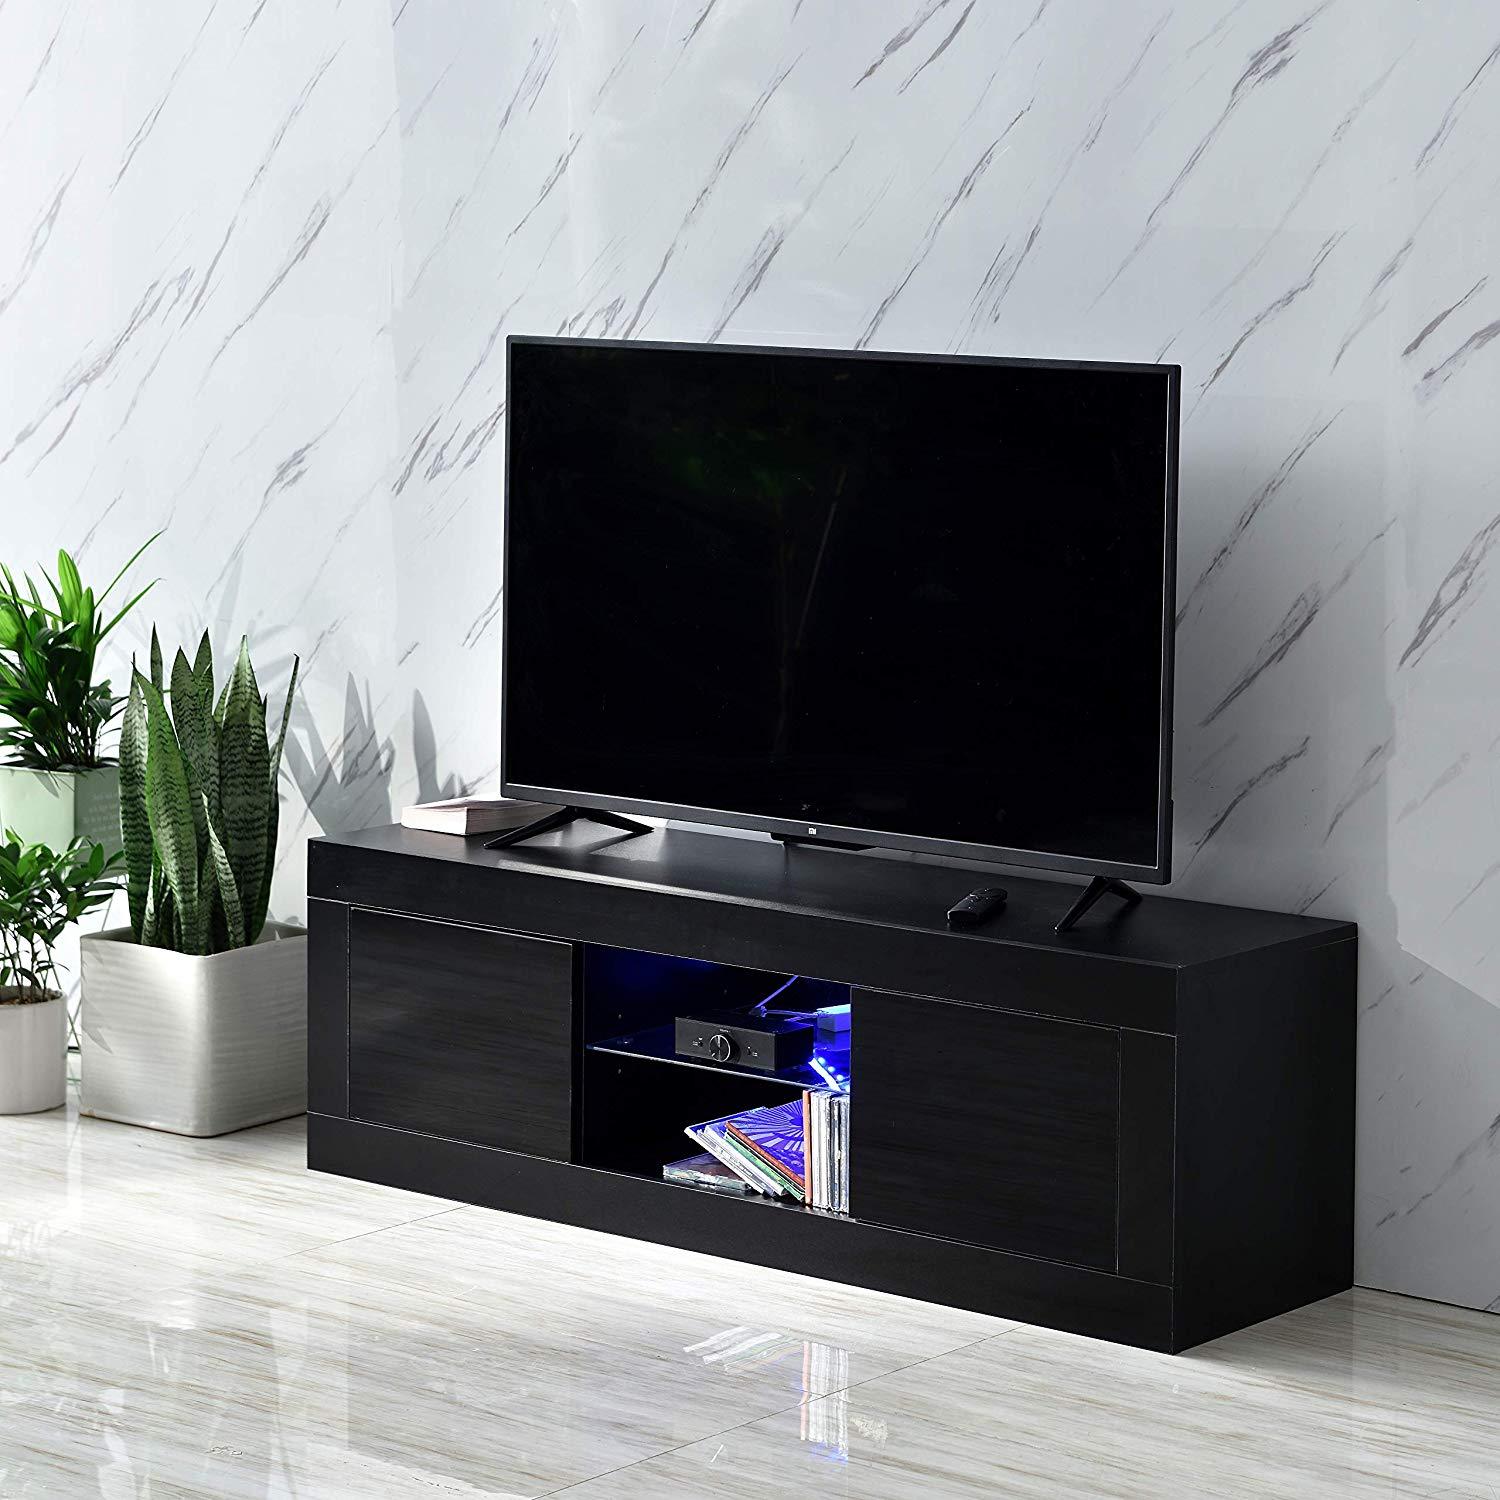 Cherry Tree Furniture MELDAL LED High Gloss TV Stand, TV Unit Cabinet for TV Size up to 50" Black, 125 cm